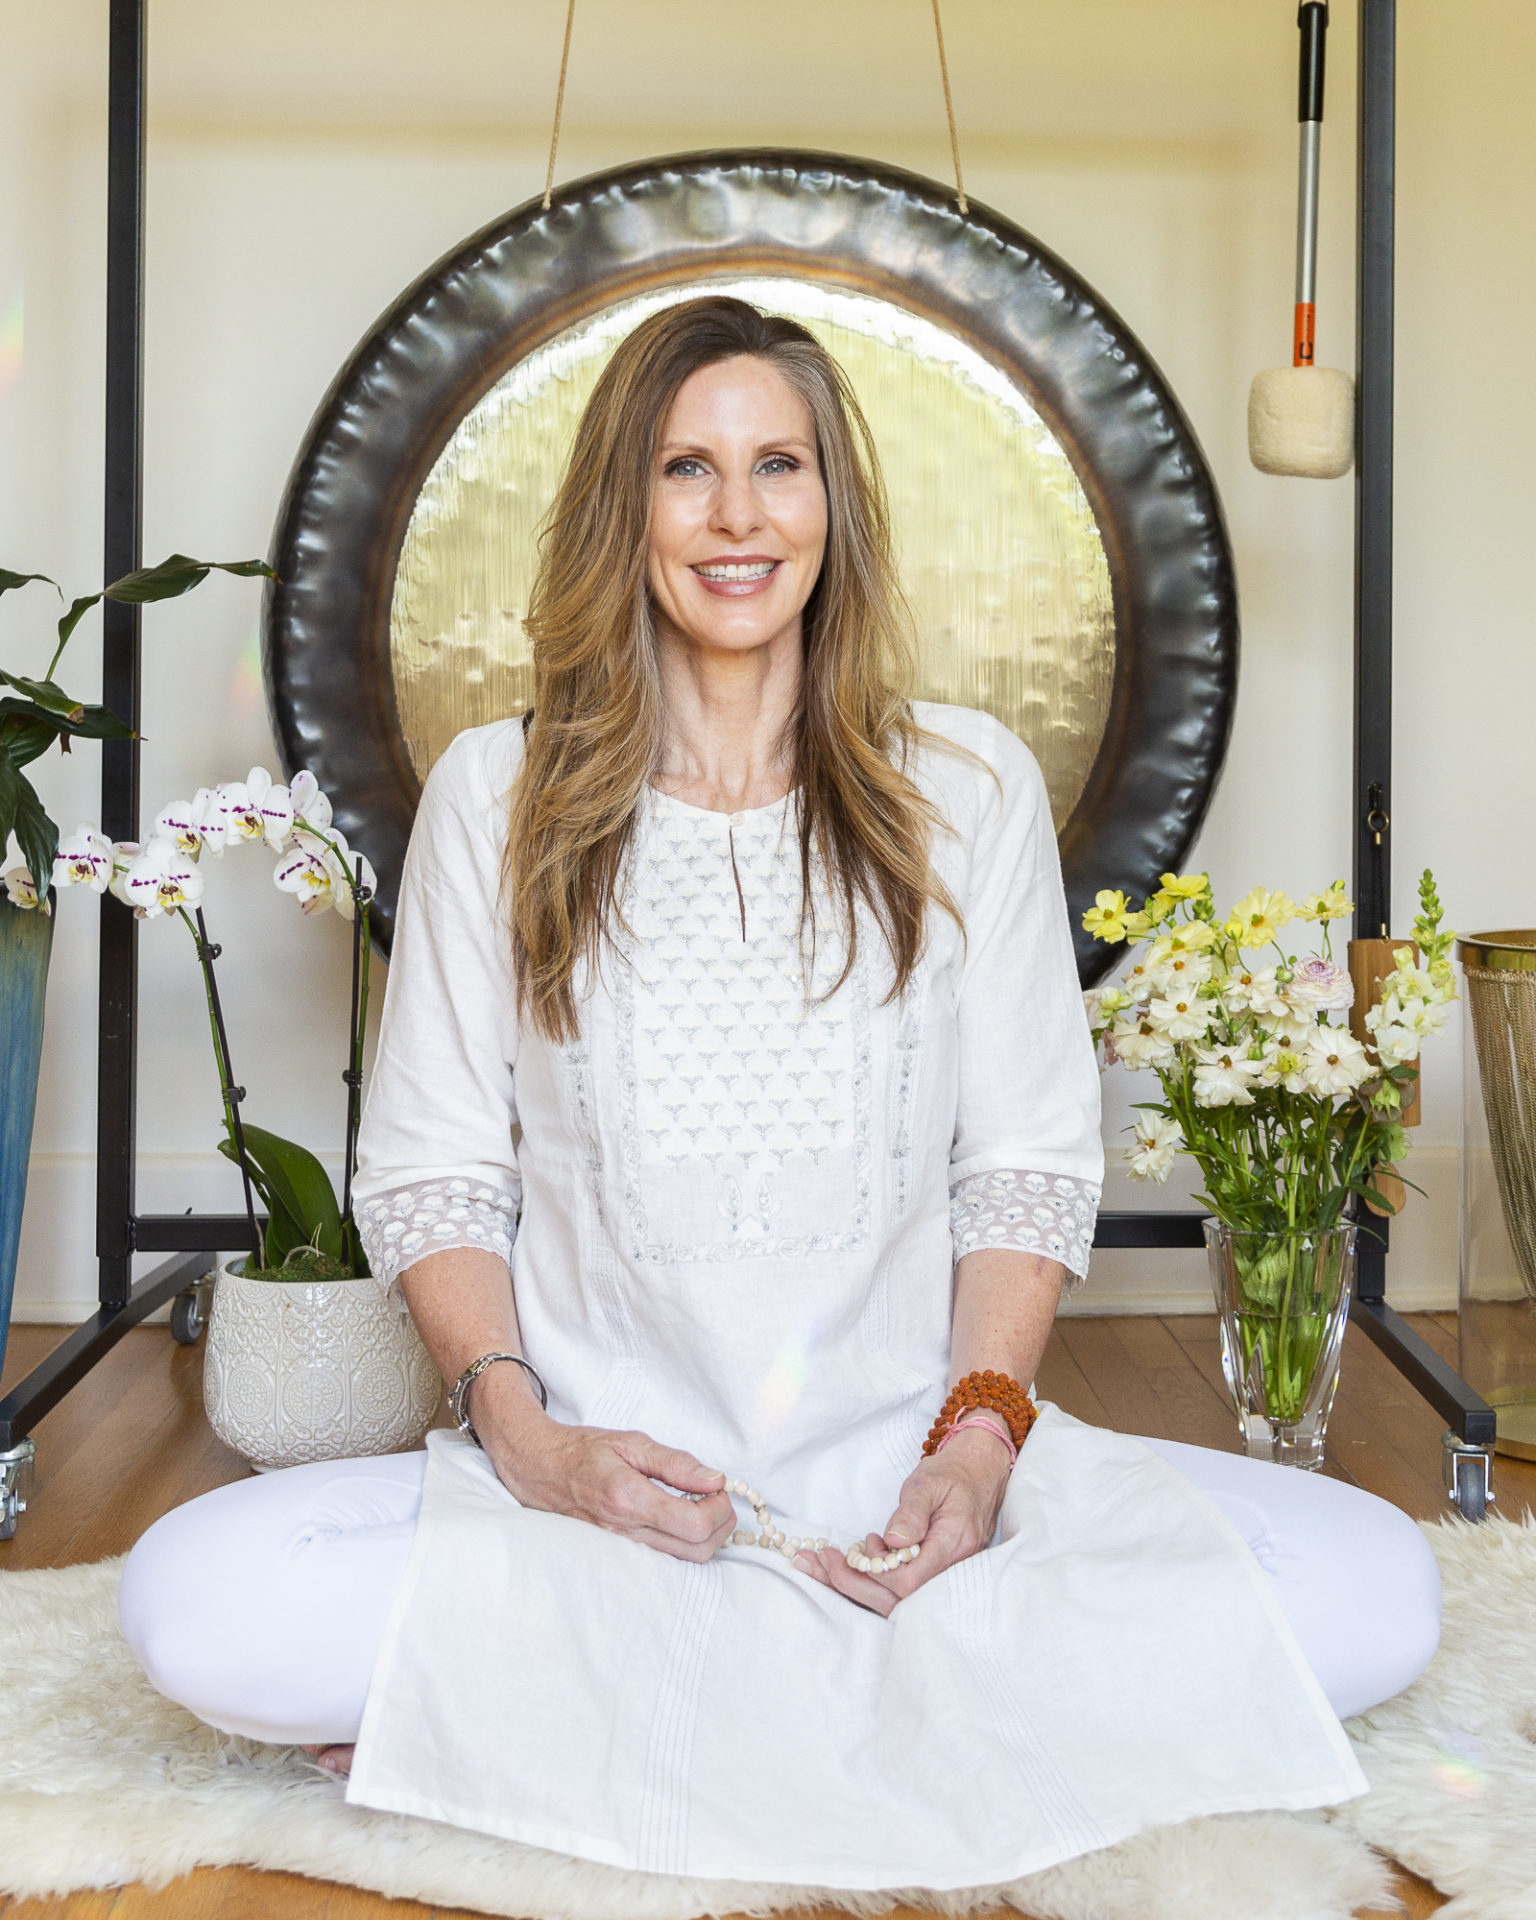 Blossom and Bliss: A Women's Yoga Retreat for Springtime Renewal